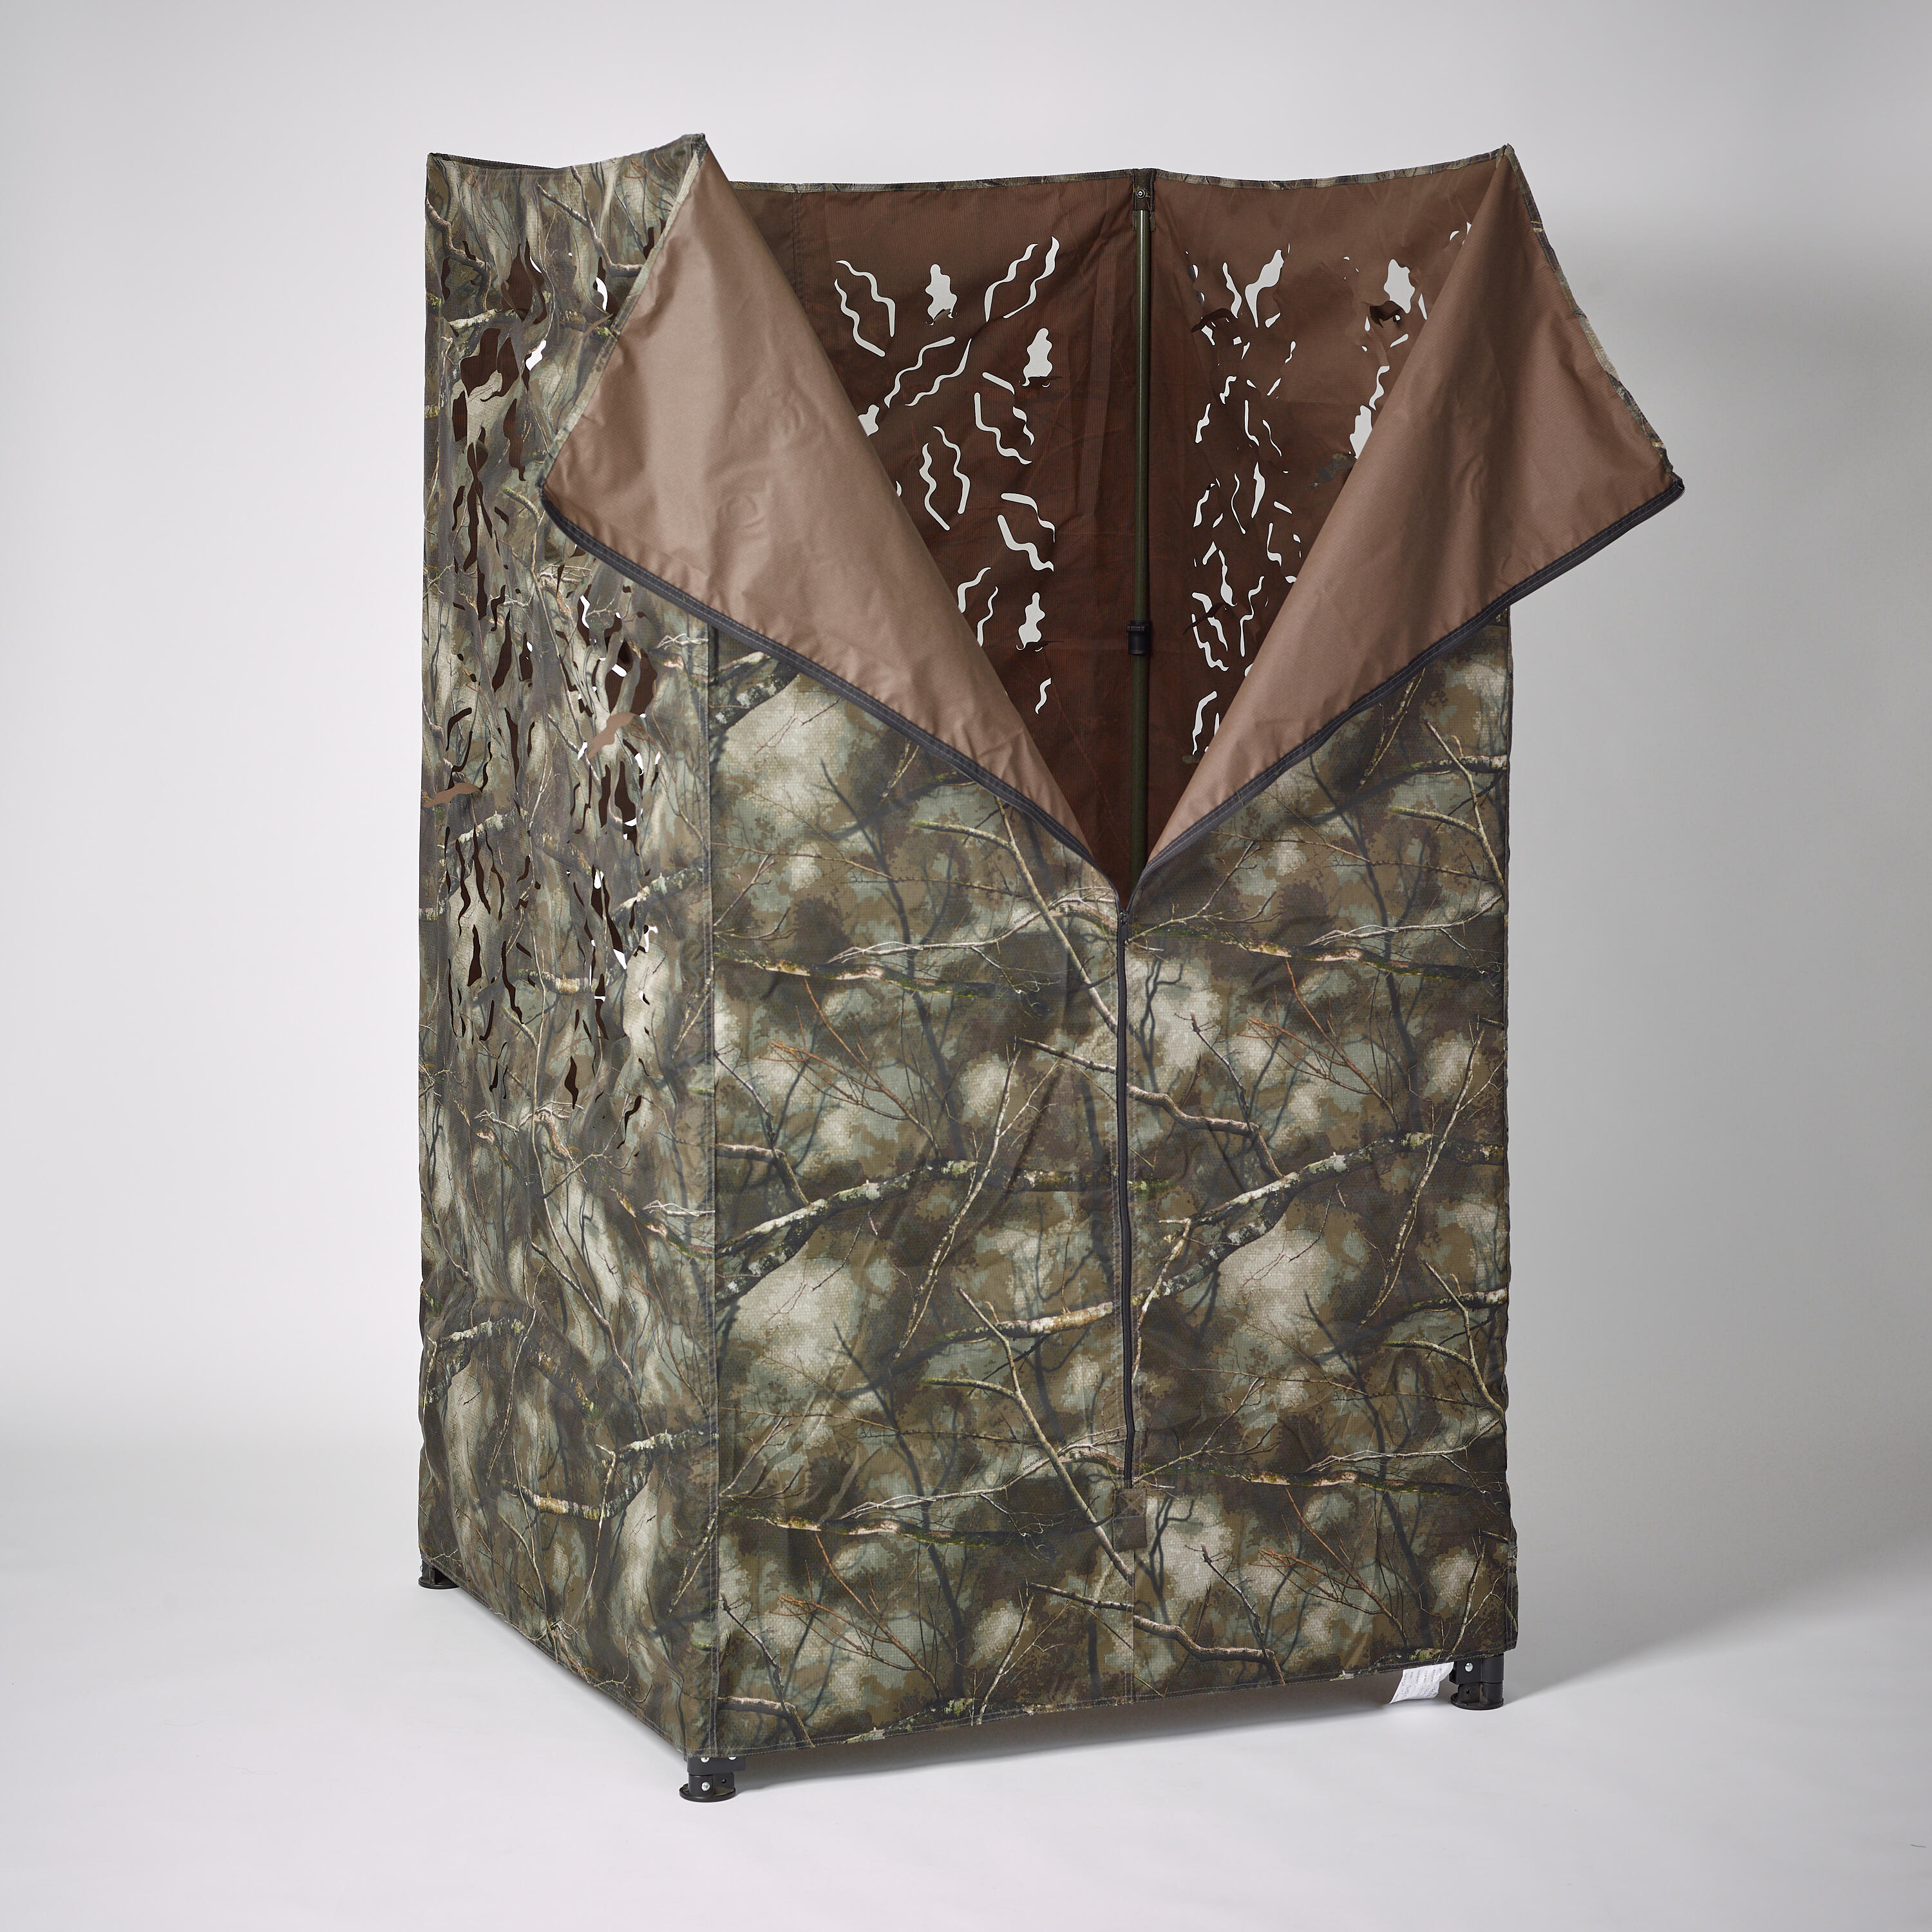 Hunting square hide 3D camouflage Treemetic 5/8